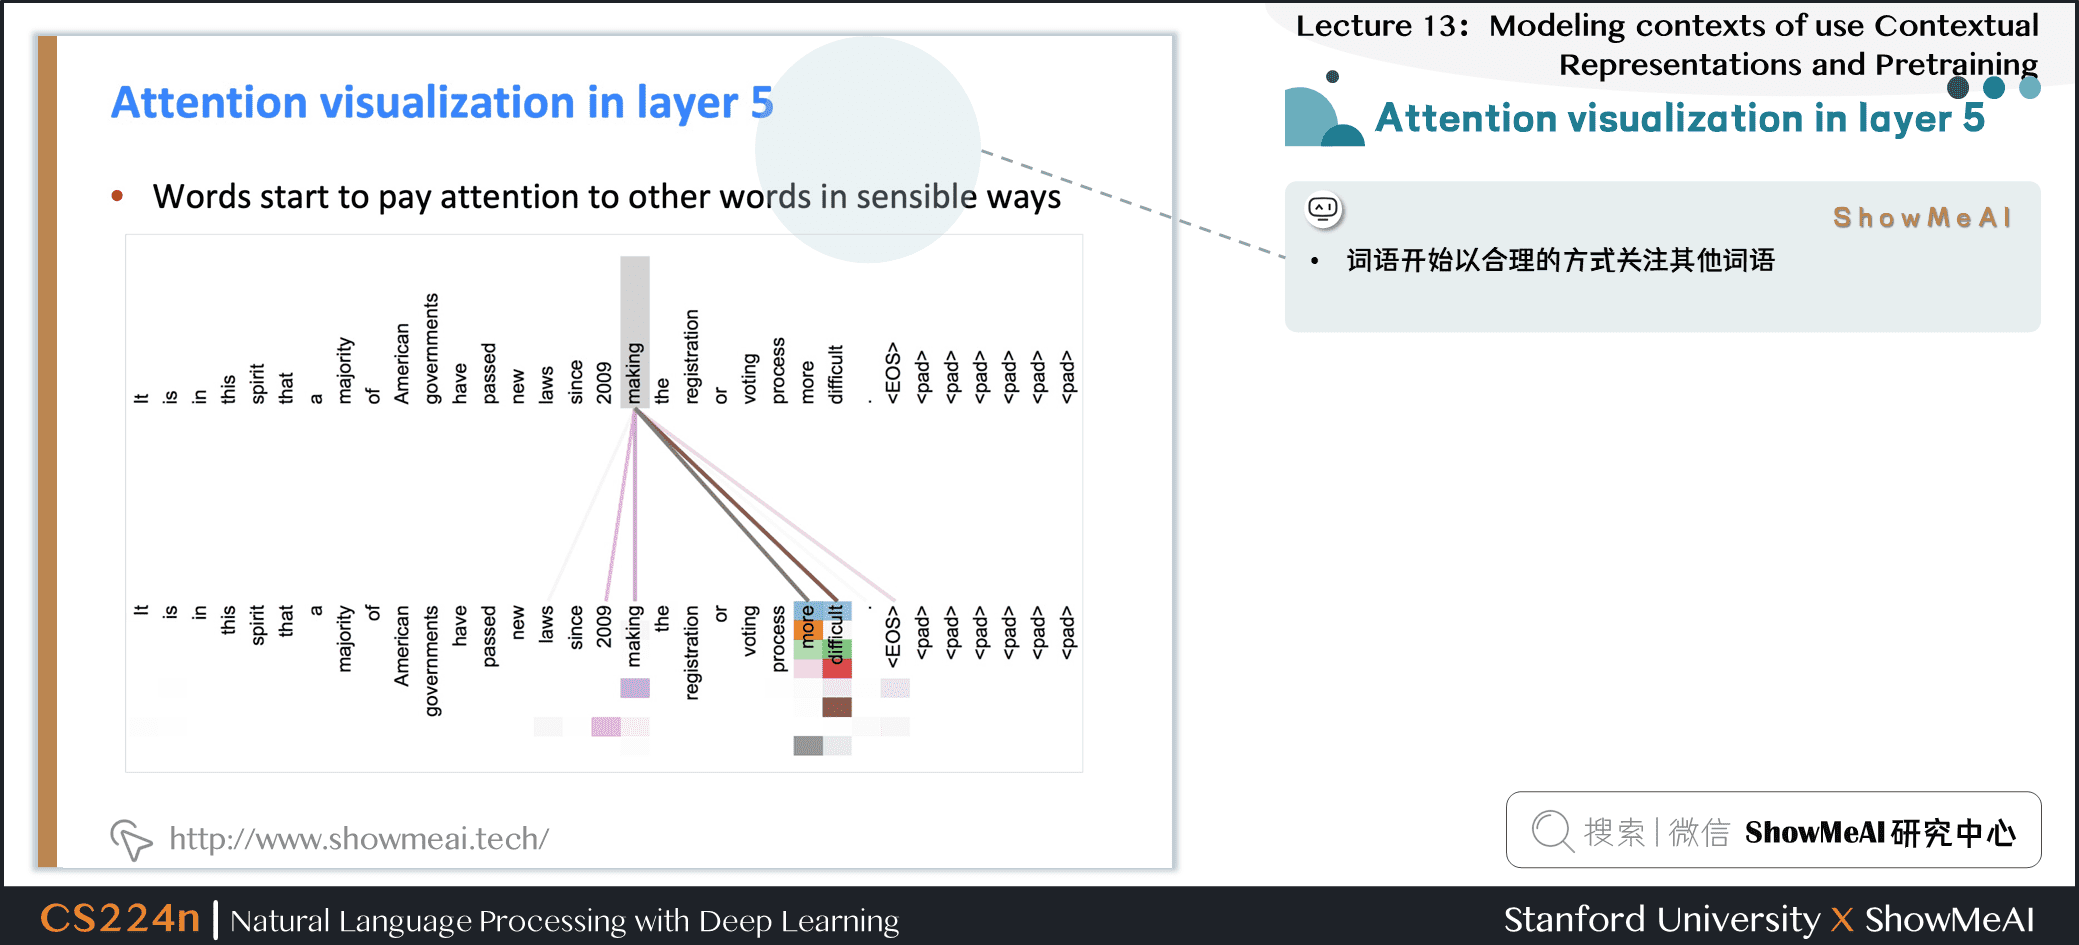 Attention visualization in layer 5